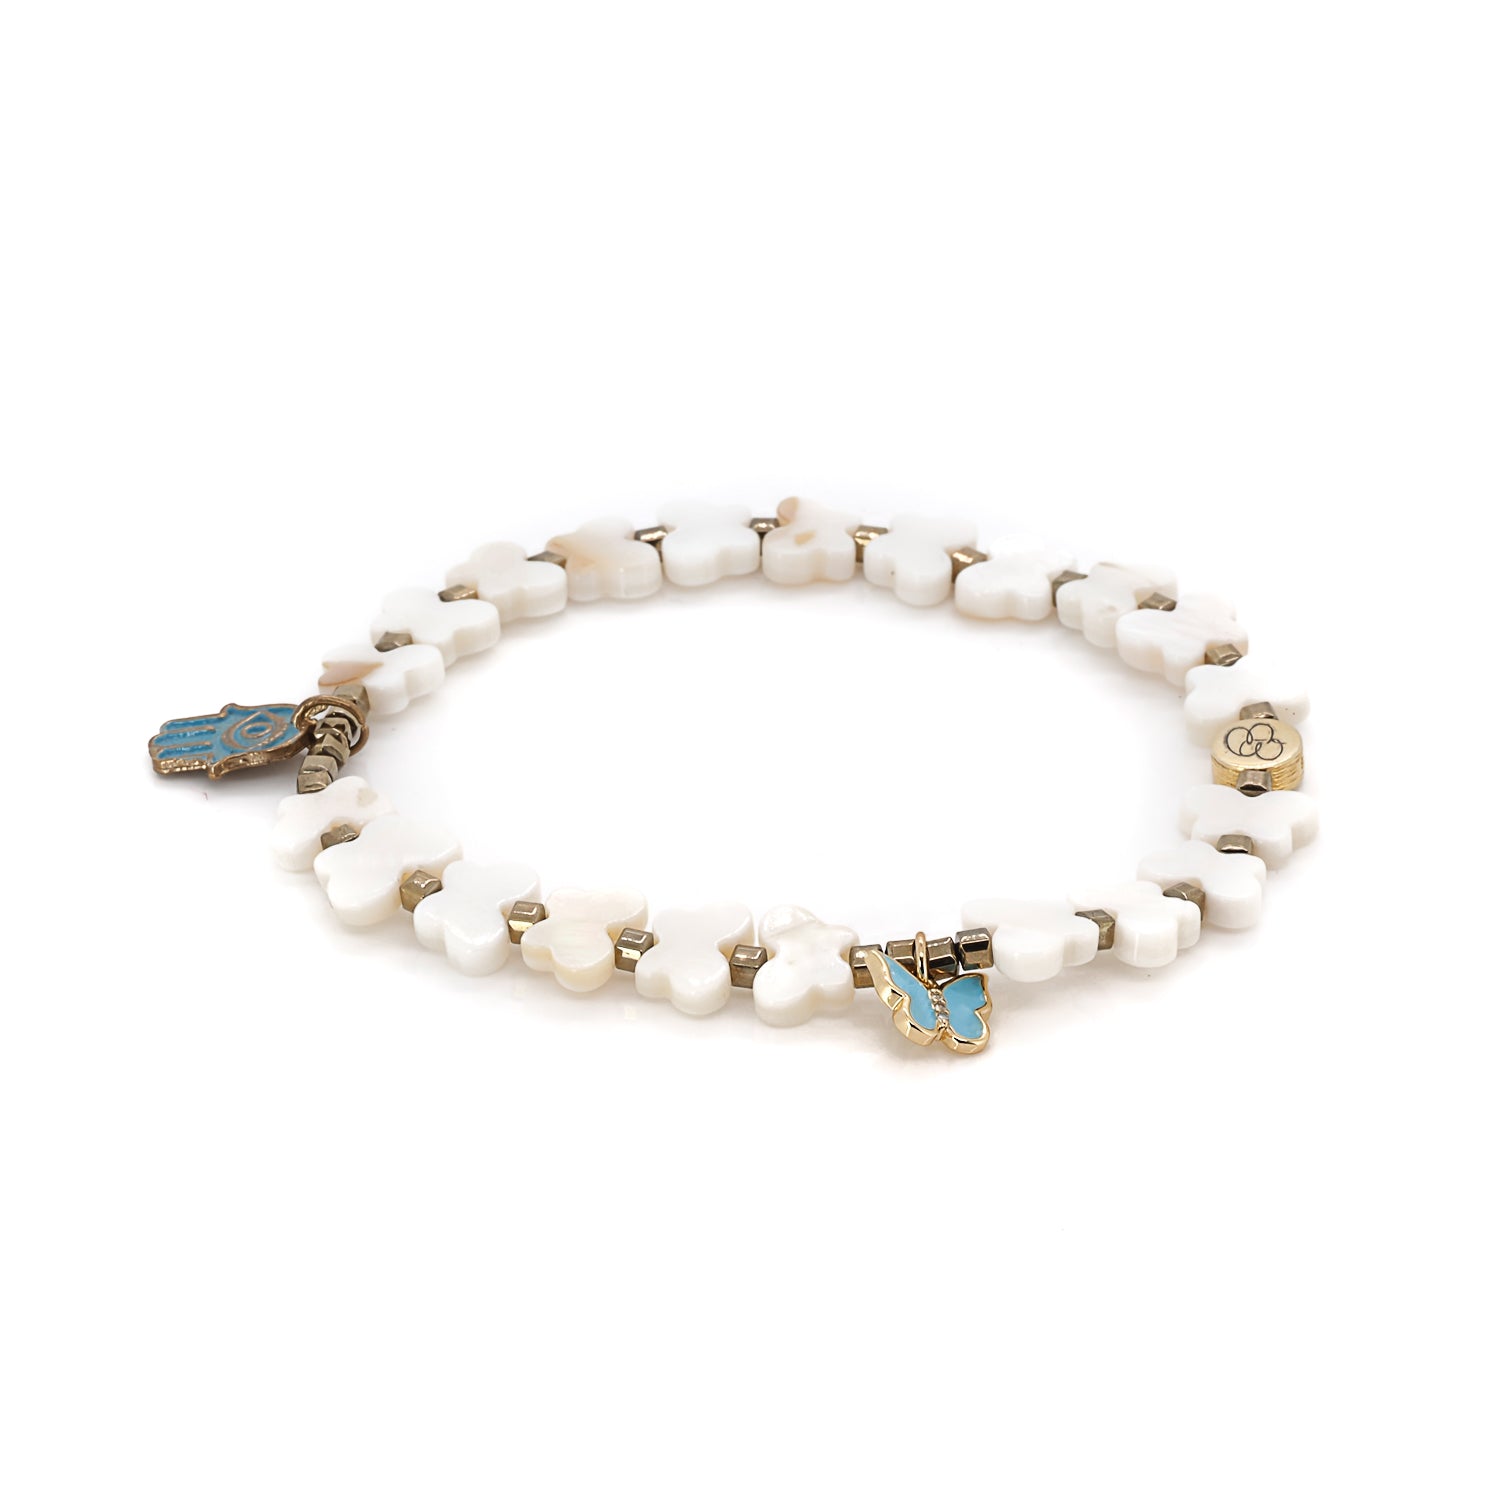 Handcrafted Beauty - Each anklet is meticulously made by hand.